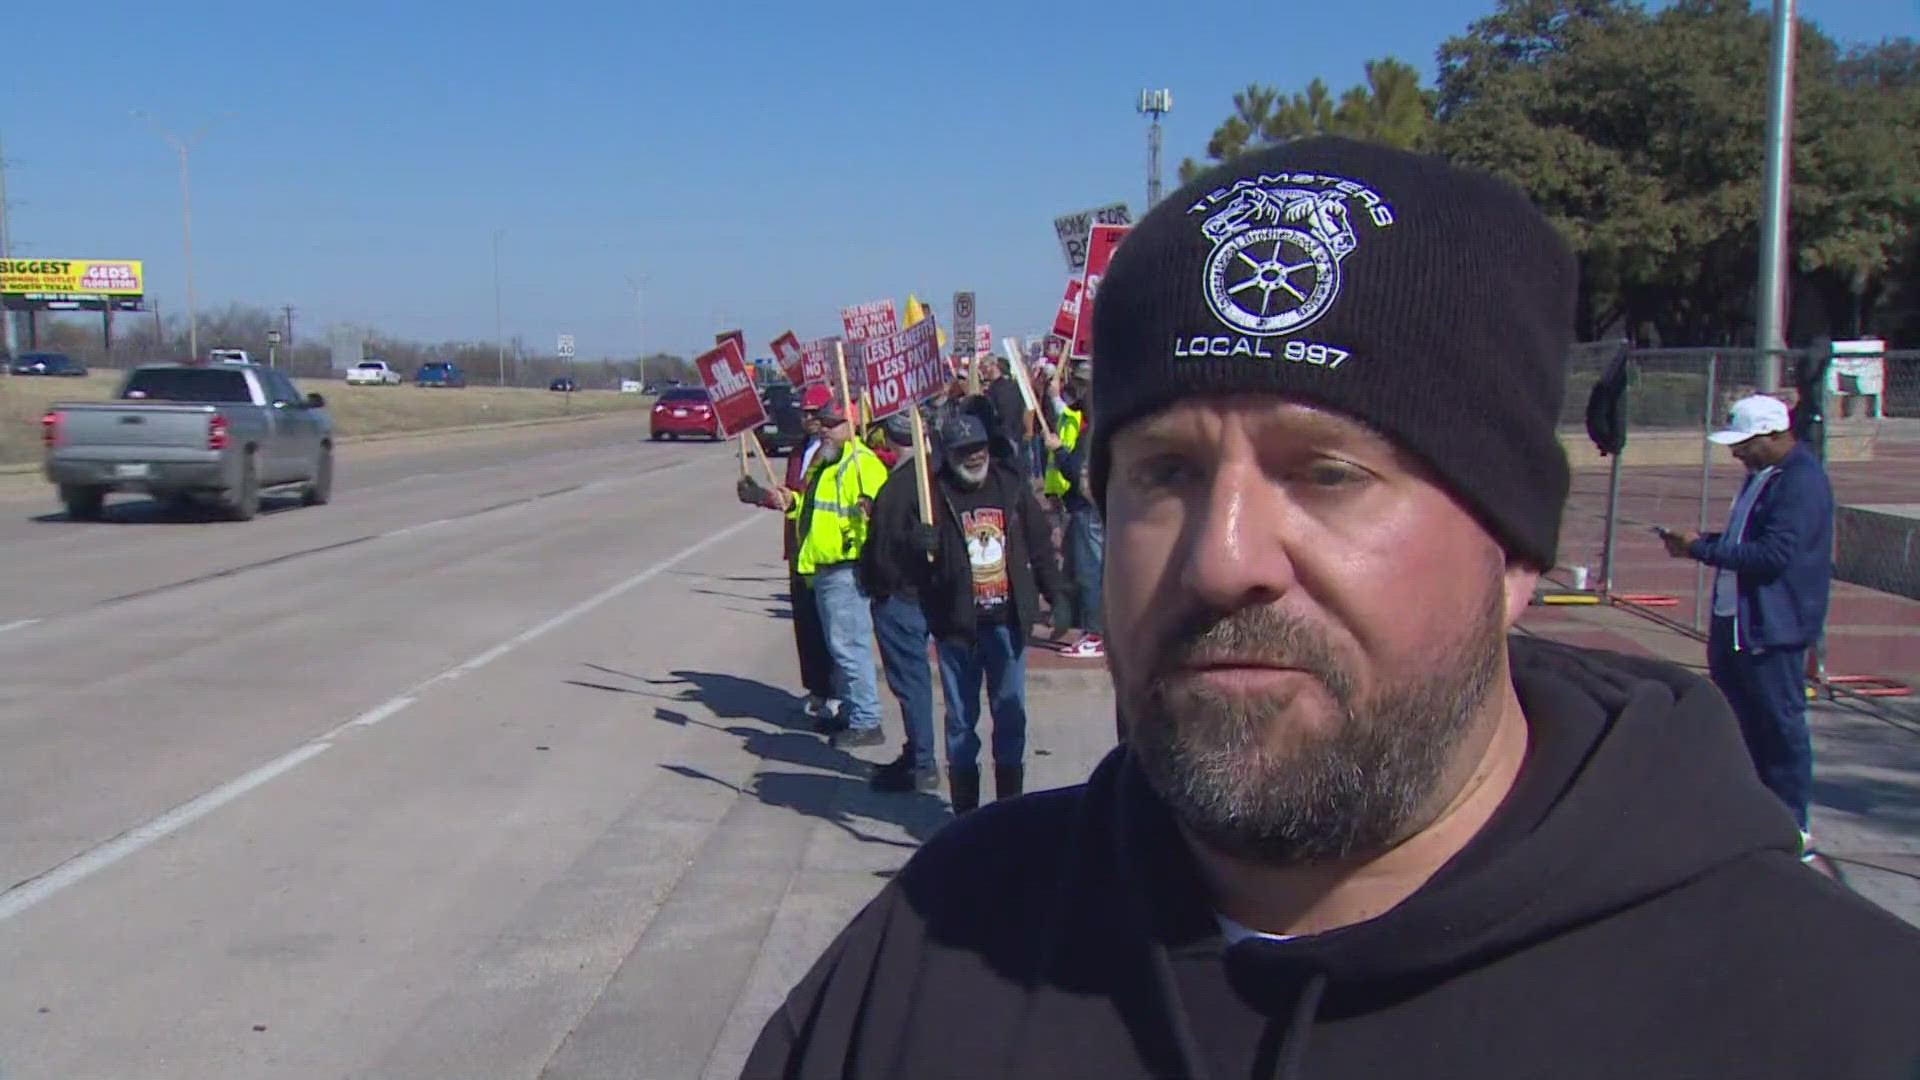 The union workers say they're demanding a better contract